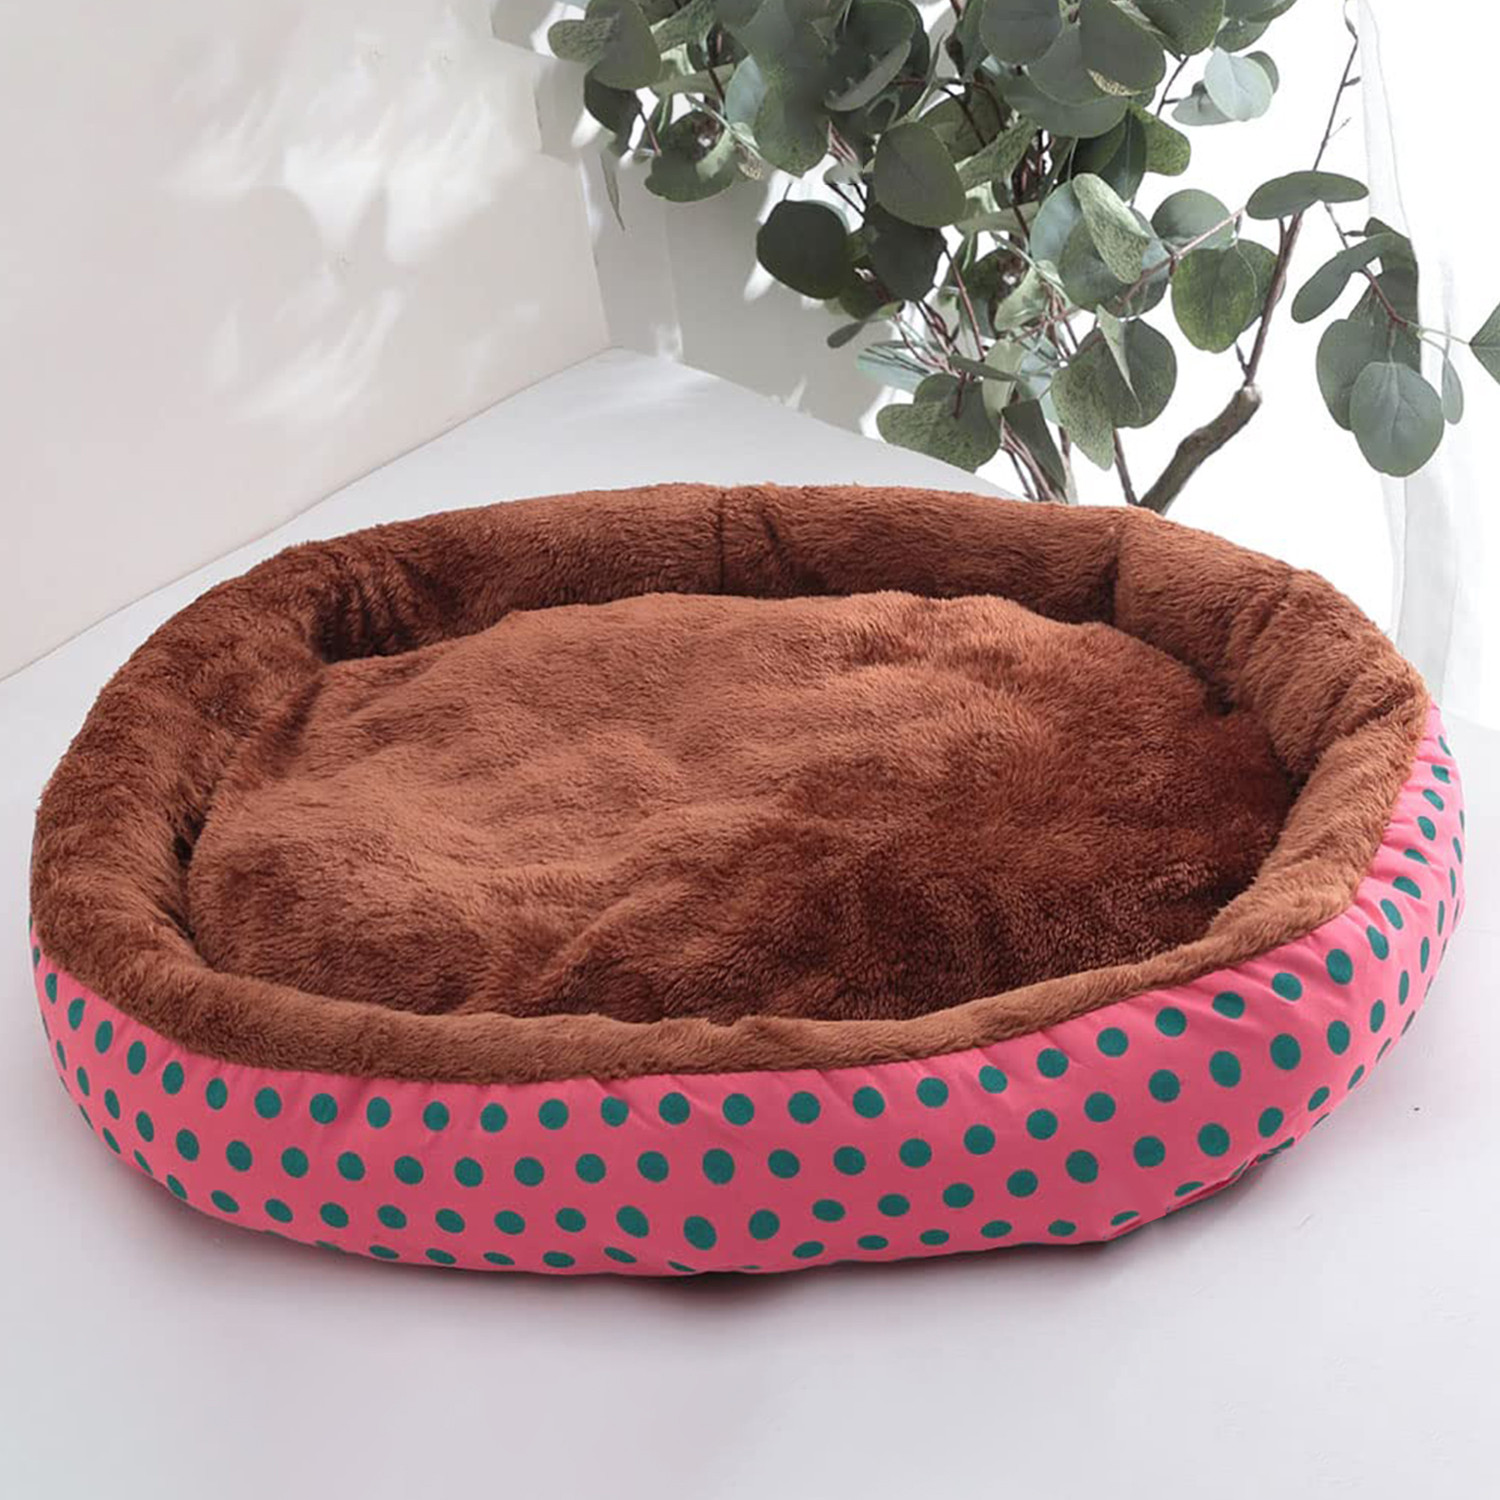 Kuber Industries Dog & Cat Bed|Soft Plush Top Pet Bed|Oxford Cloth Polyester Filling|Medium Washable Dog Bed|Circular Cat Bed with Rise-Edge Pillow|QY039PC-L|Pink & Coffee